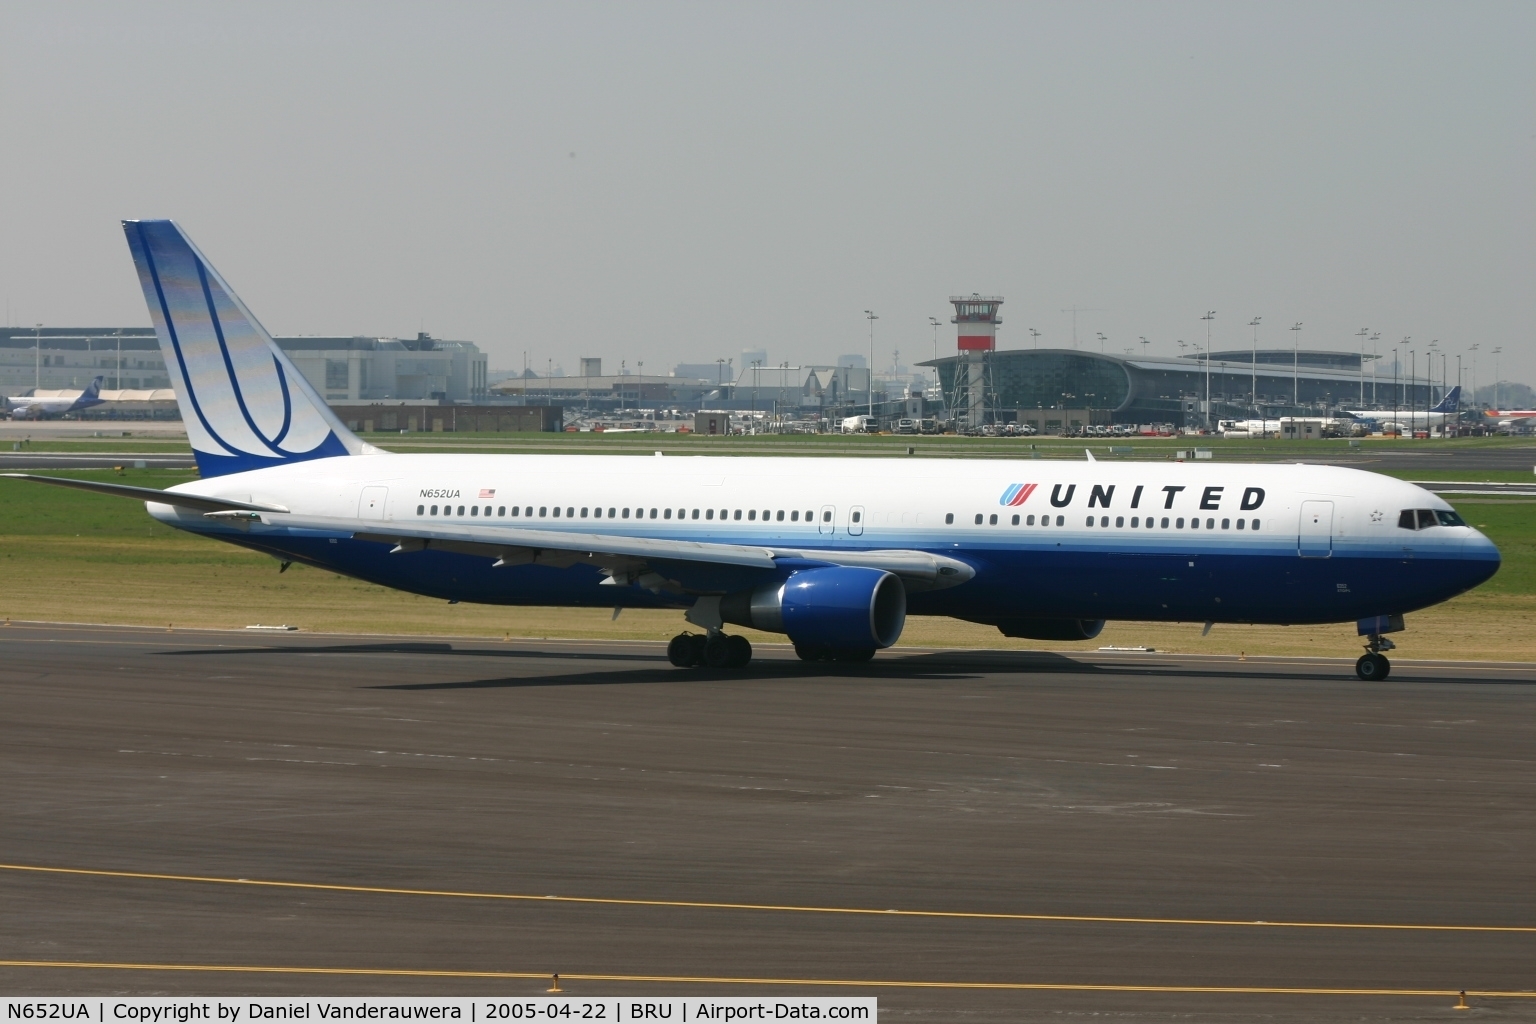 N652UA, 1992 Boeing 767-322 C/N 25390, taxiing to RWY 25R to fly back home - note the old control tower now destroyed